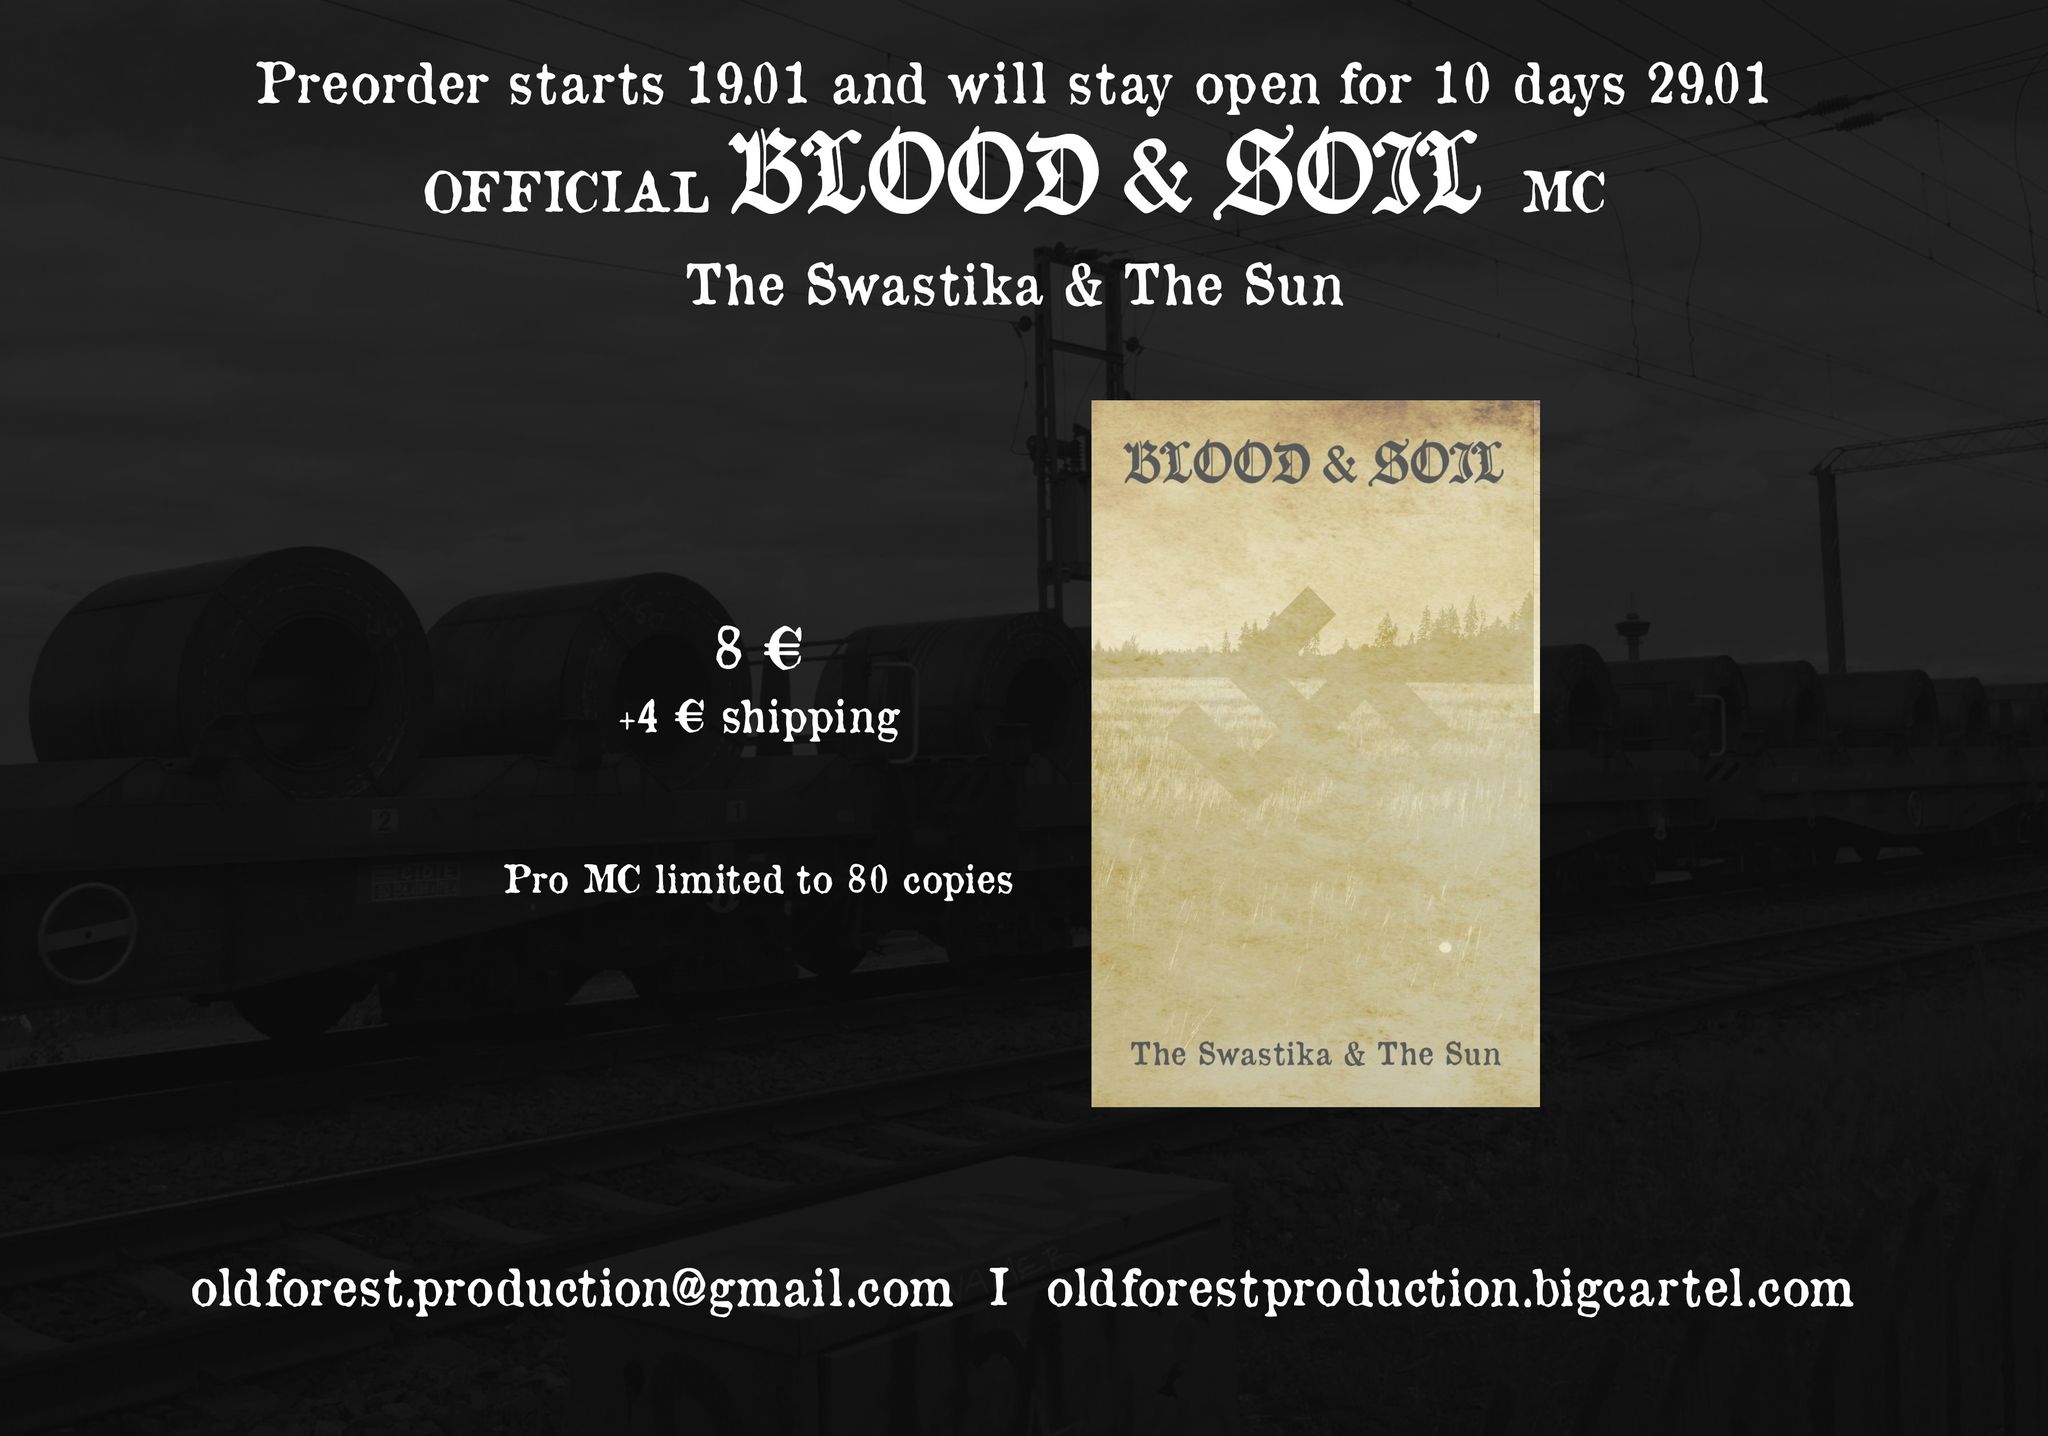 BLOOD & SOIL: The Swastika & The Sun MC - Old Forest Production image 1